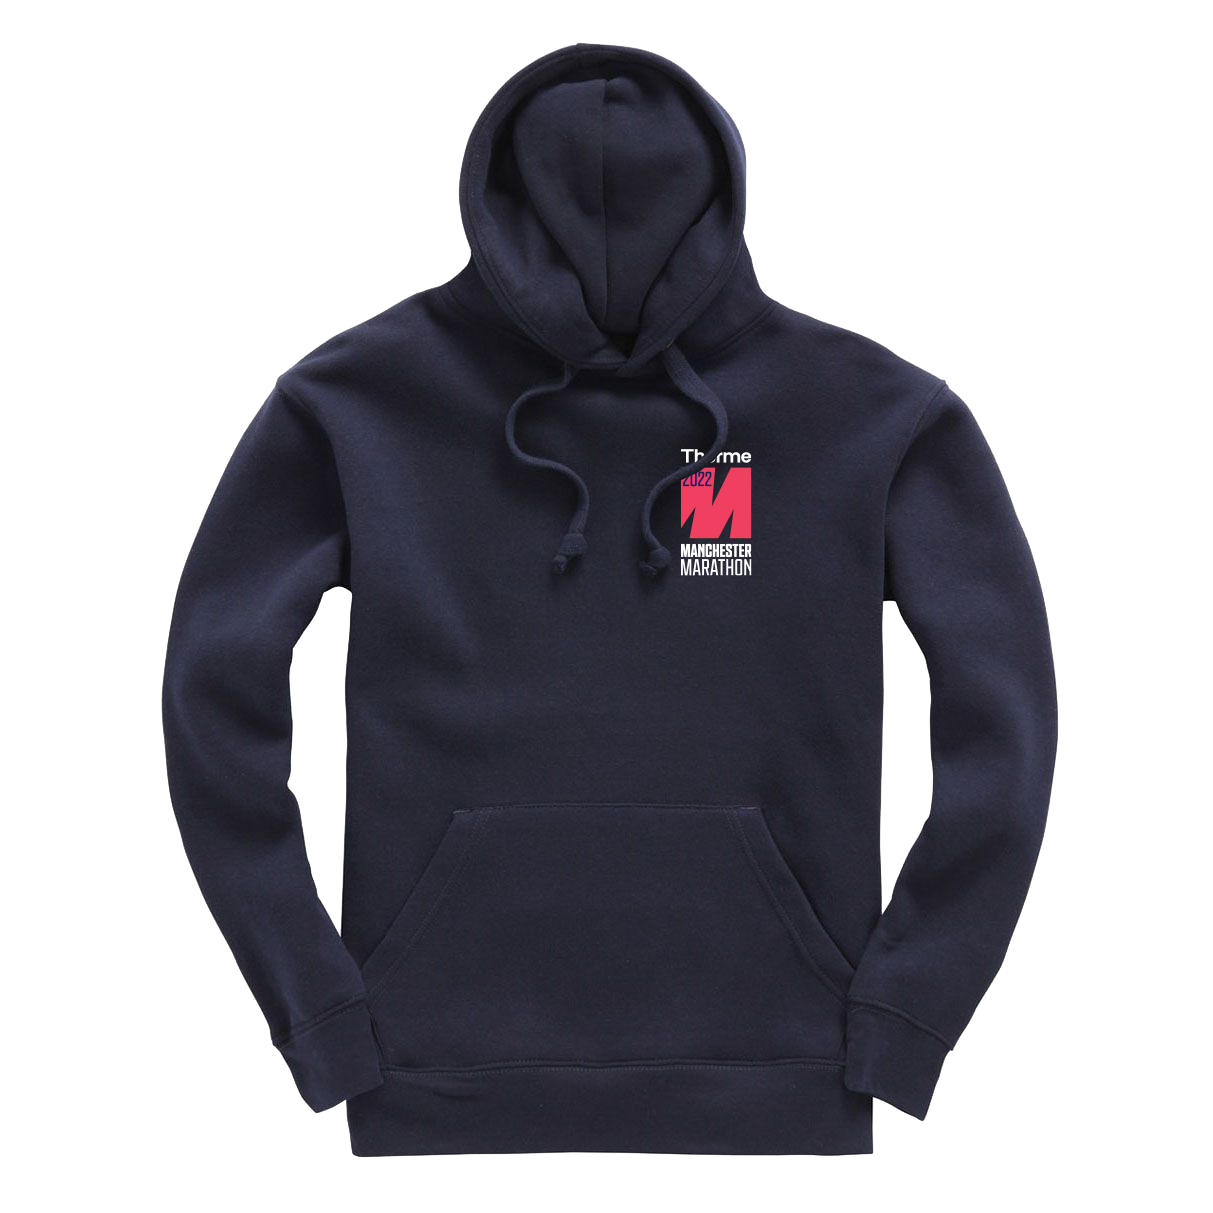 Finisher Hoodies Available to Pre-Order - Manchester Marathon